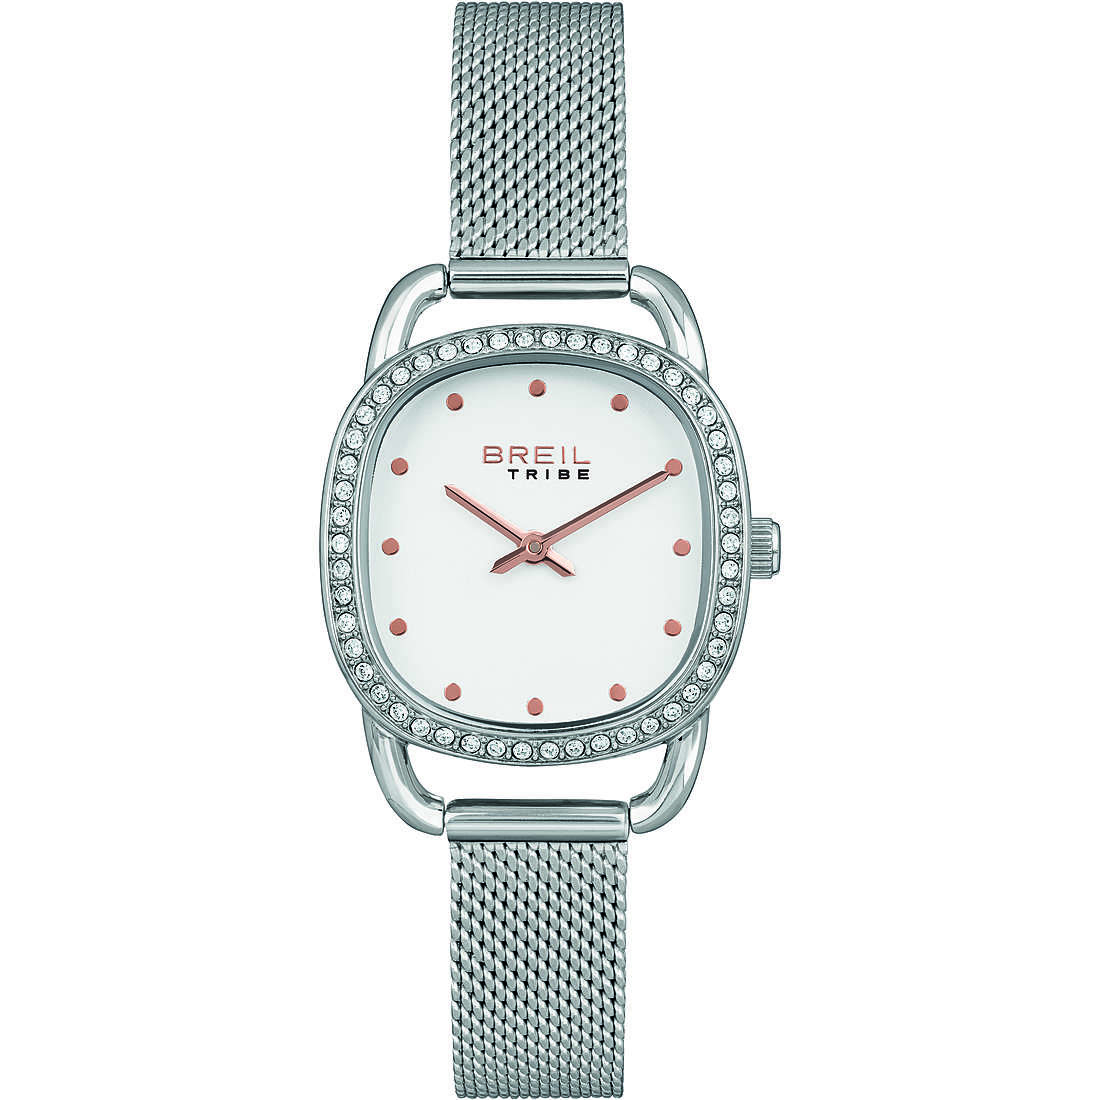 only time watch Steel White dial woman Penelope EW0491